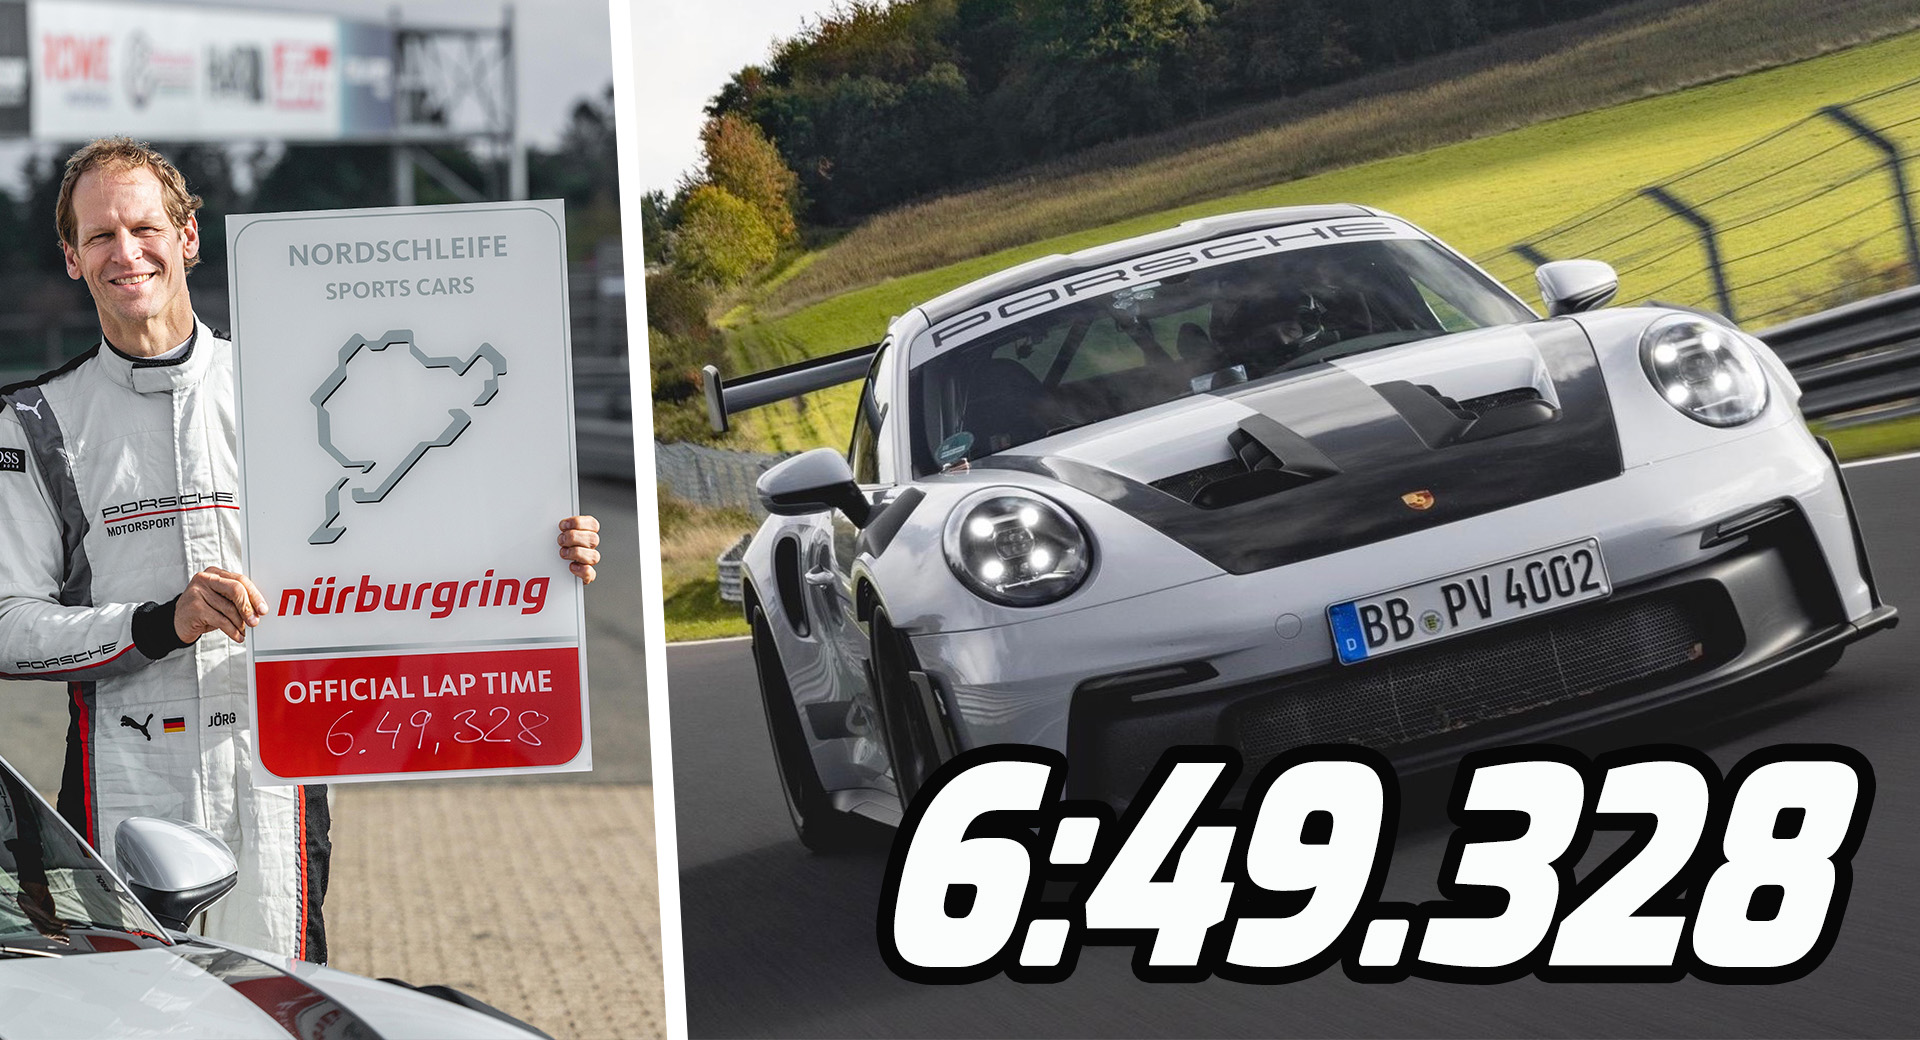 23 Porsche 911 Gt3 Rs Laps Nurburgring In 6 Min 49 Beating Gt3 By Over 10 Seconds Carscoops